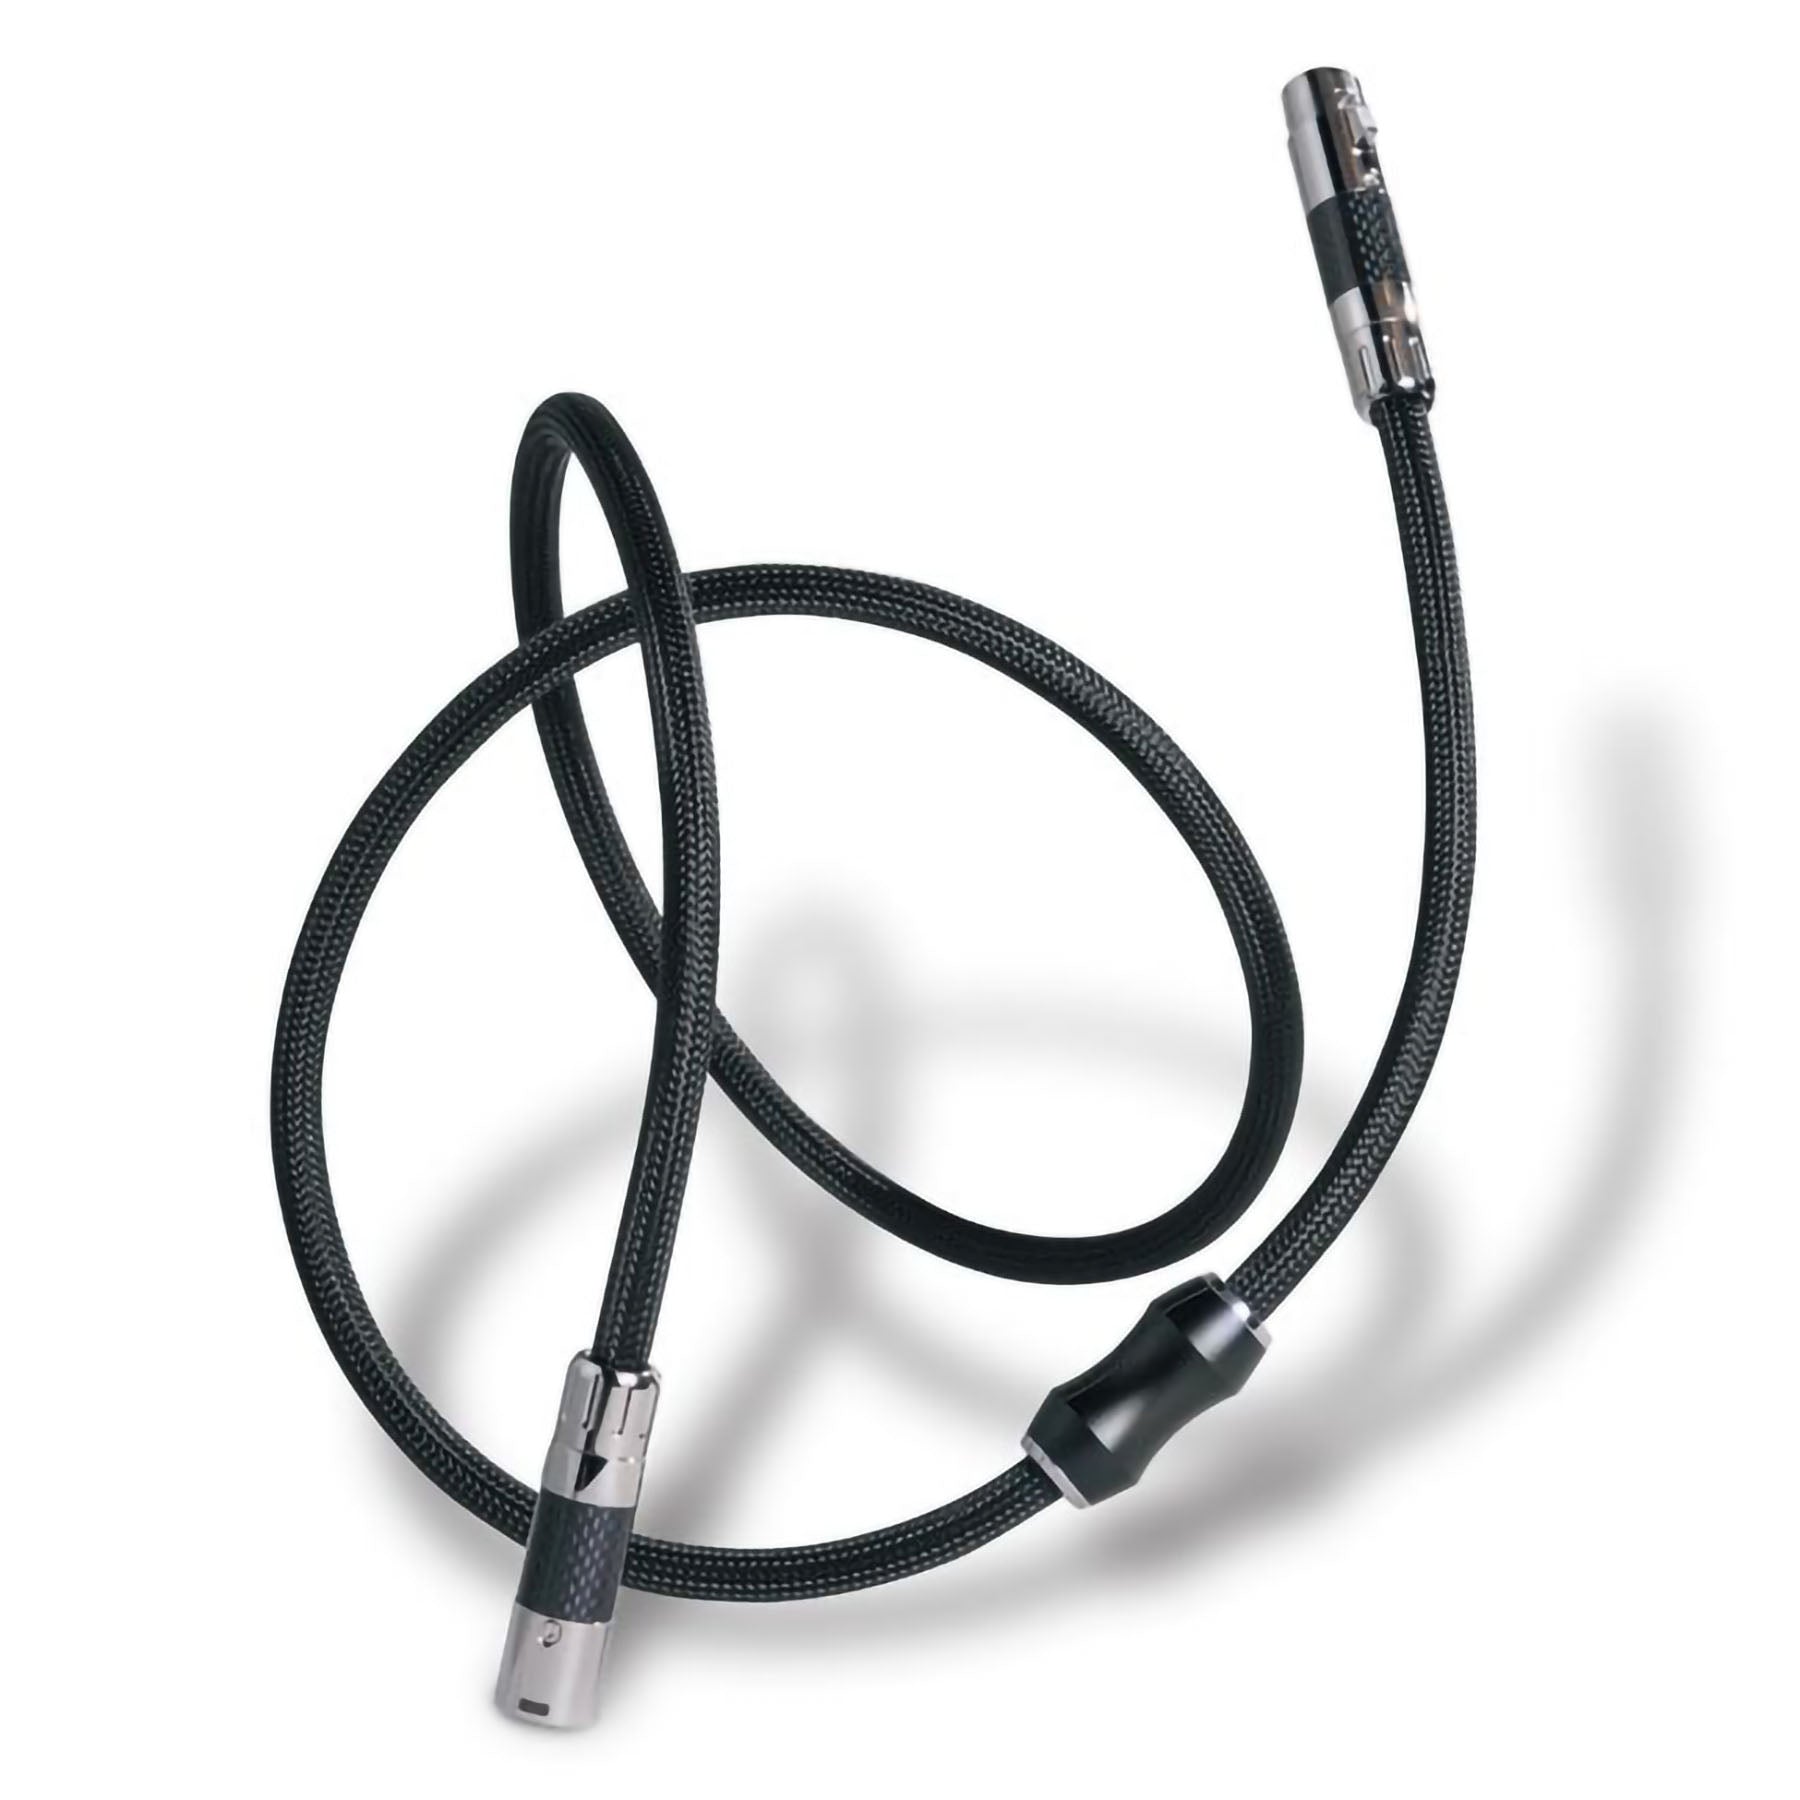 Kharma Elegance Analogue Interconnect Cable (pair)